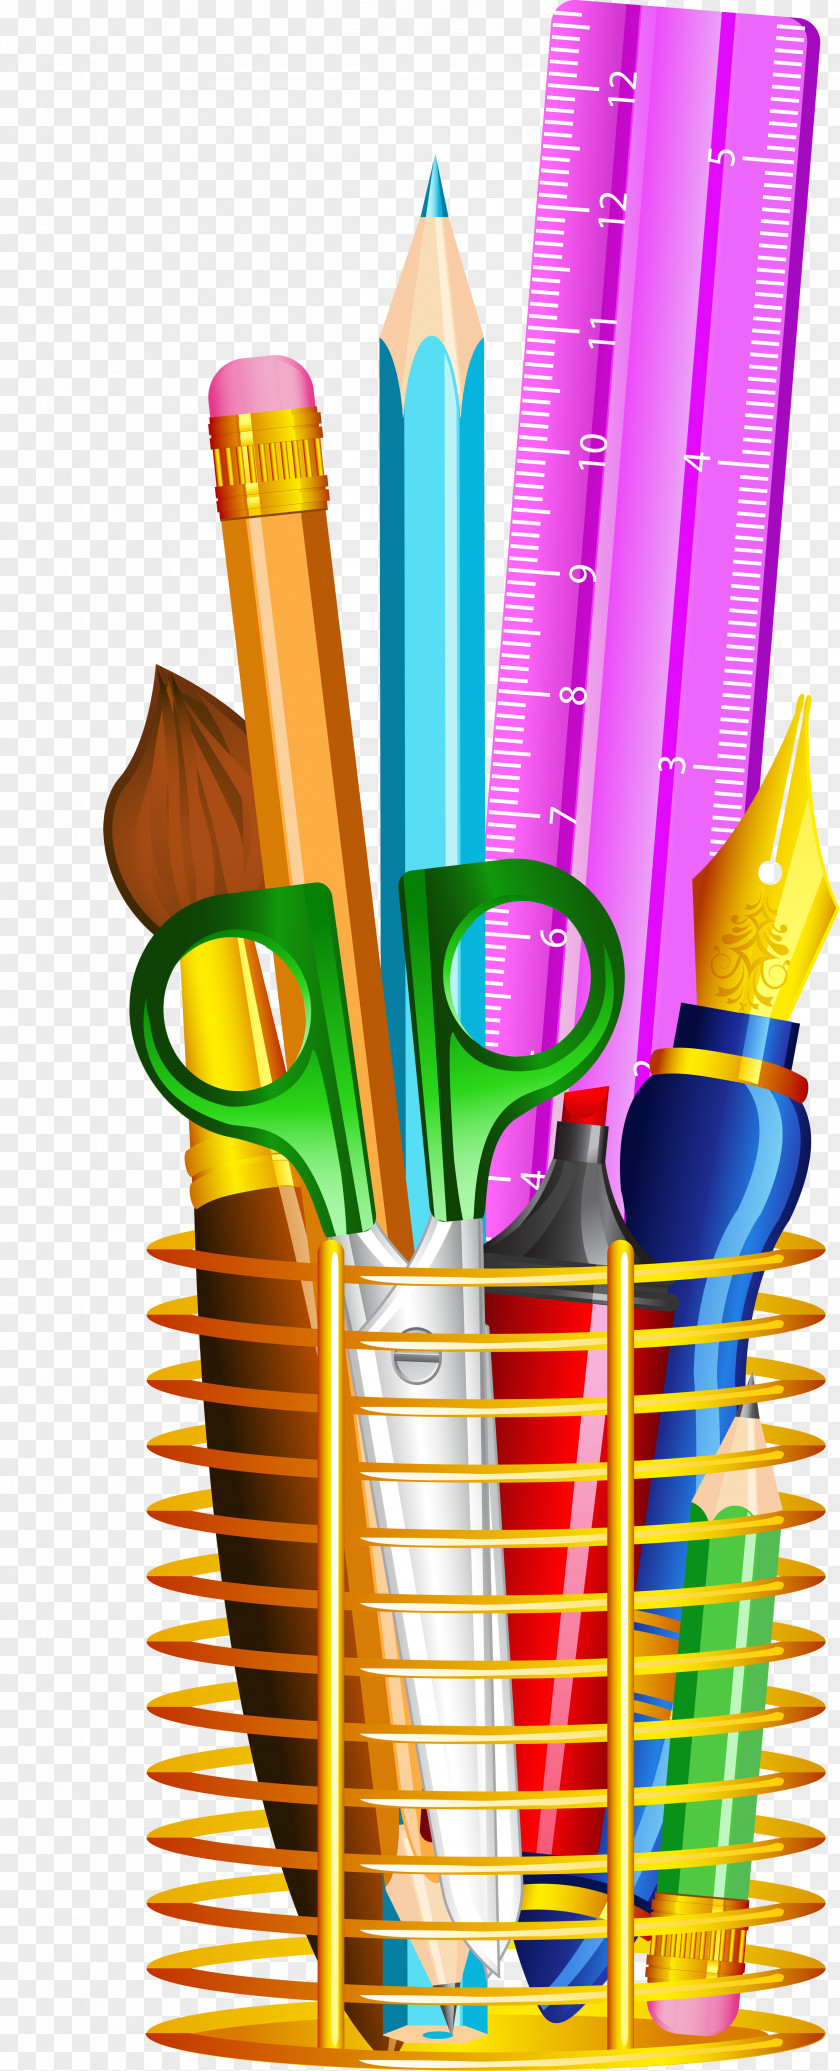 Pen Office Supplies Stationery & Pencil Cases Clip Art PNG